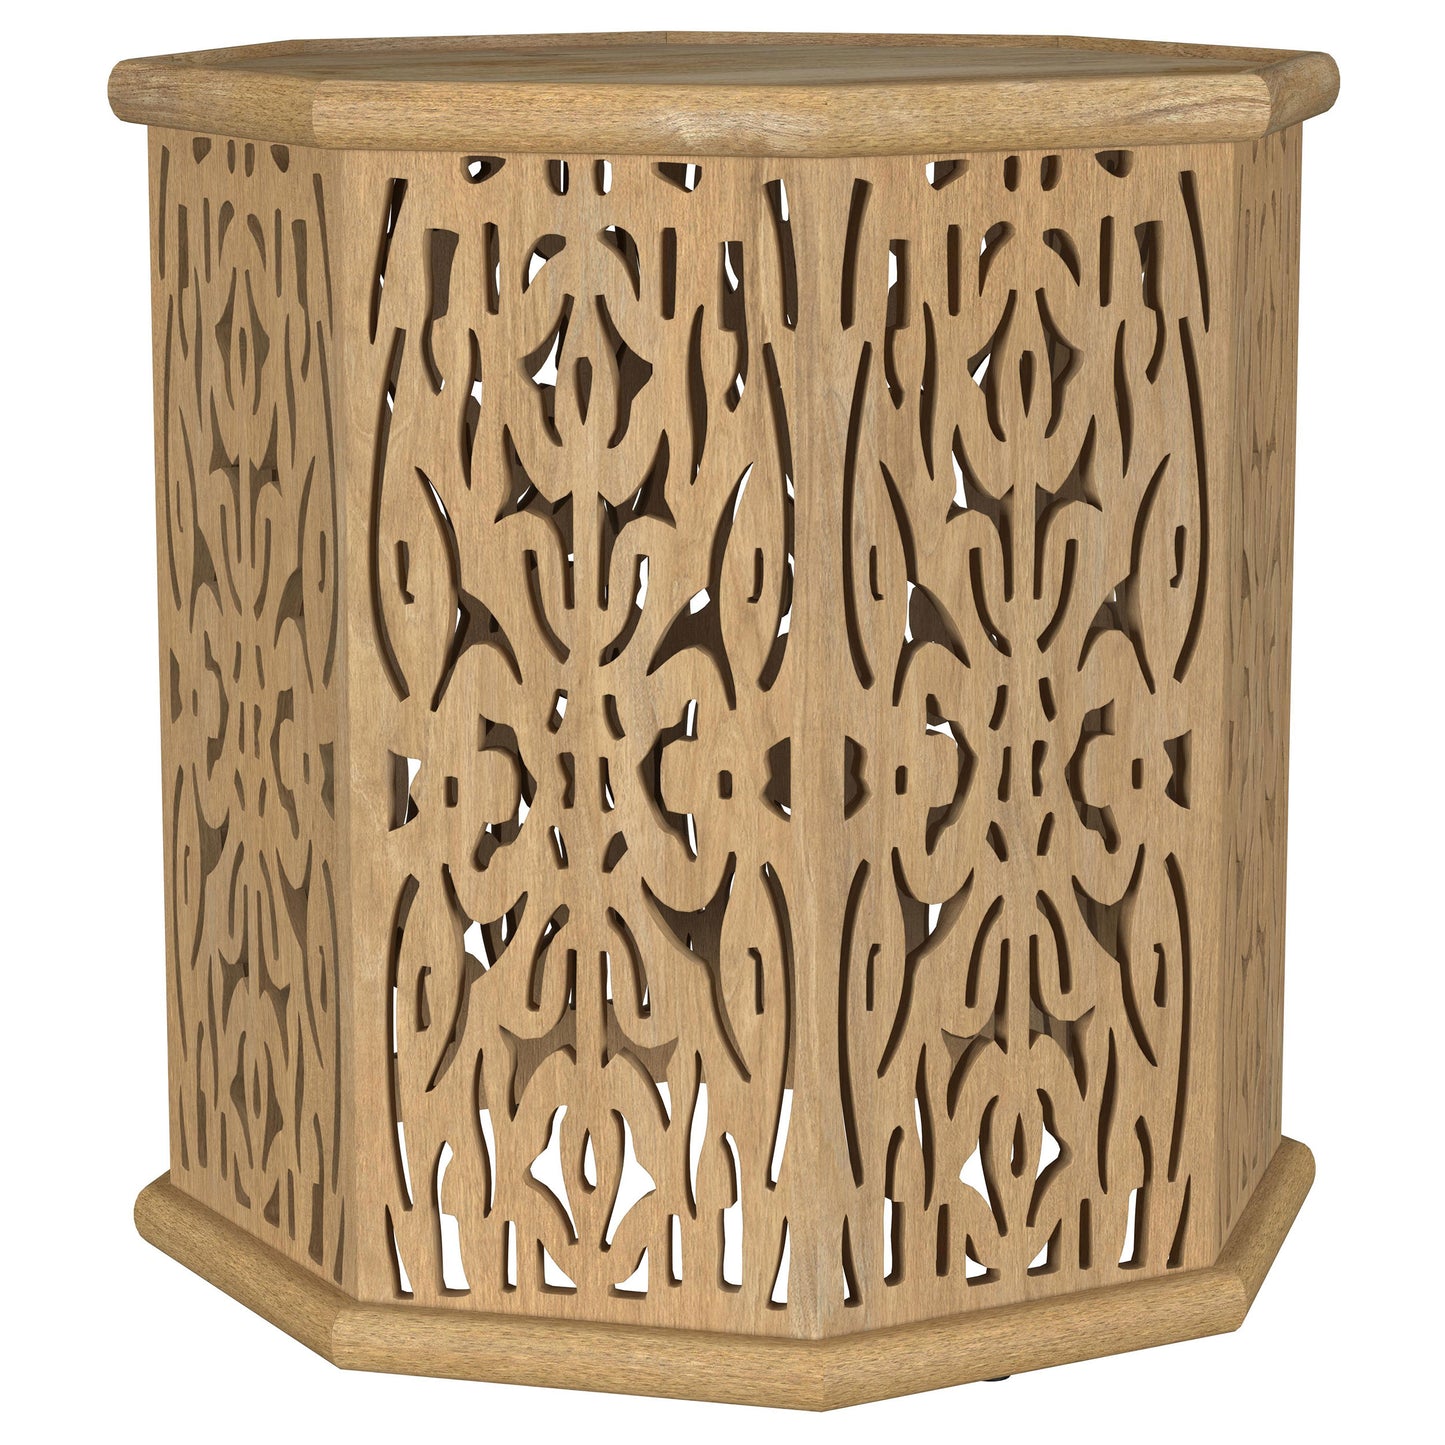 Torres Octagonal Solid Wood Side Table with Intricate Openwork Carvings Natural Brown